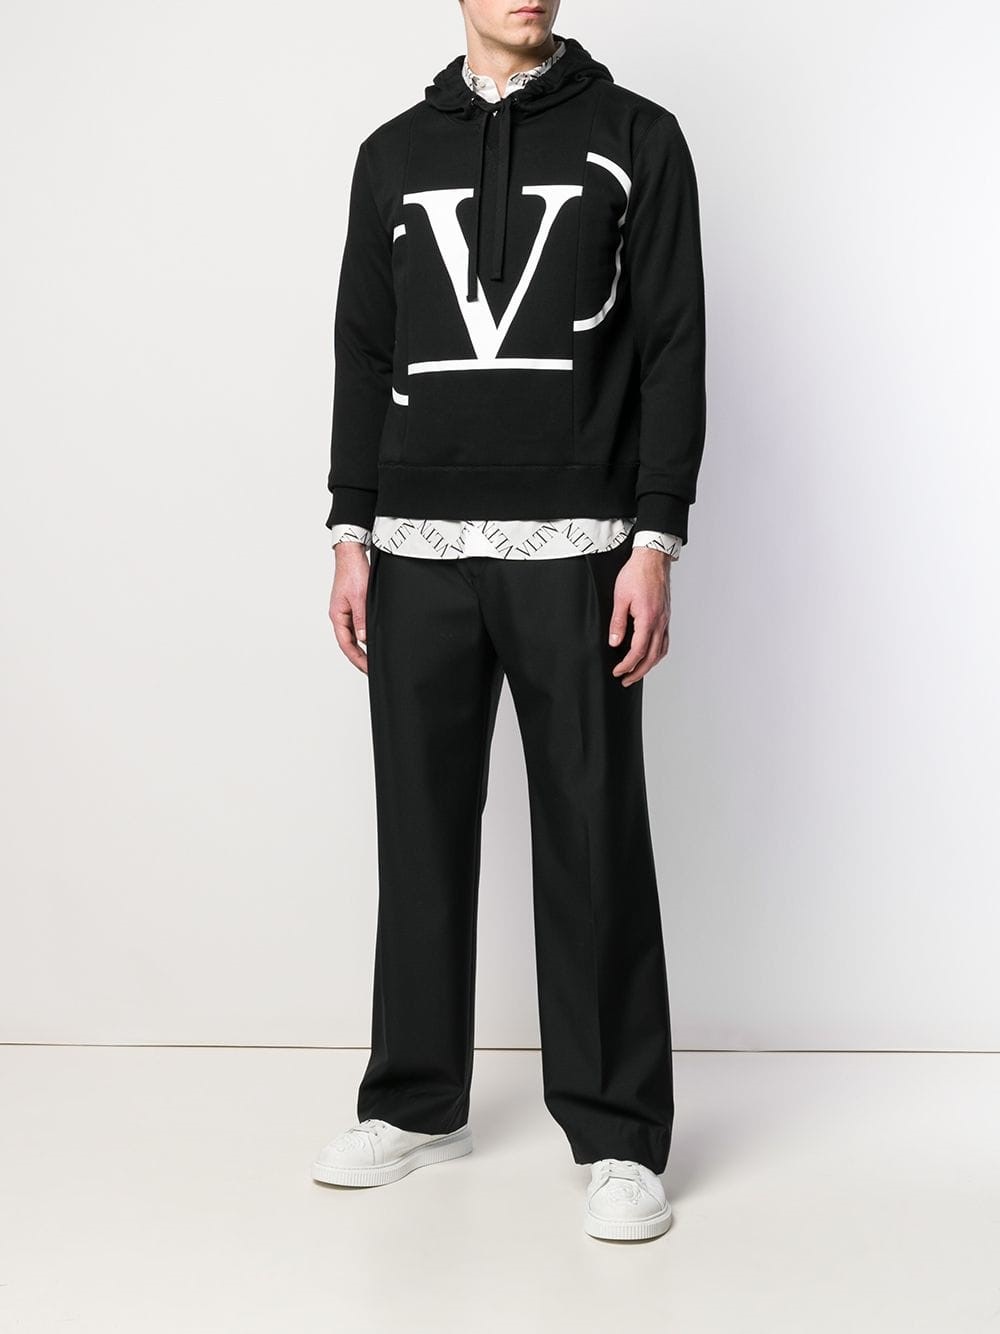 valentino LOGO HOODIE SWEATER available on montiboutique.com - 27192